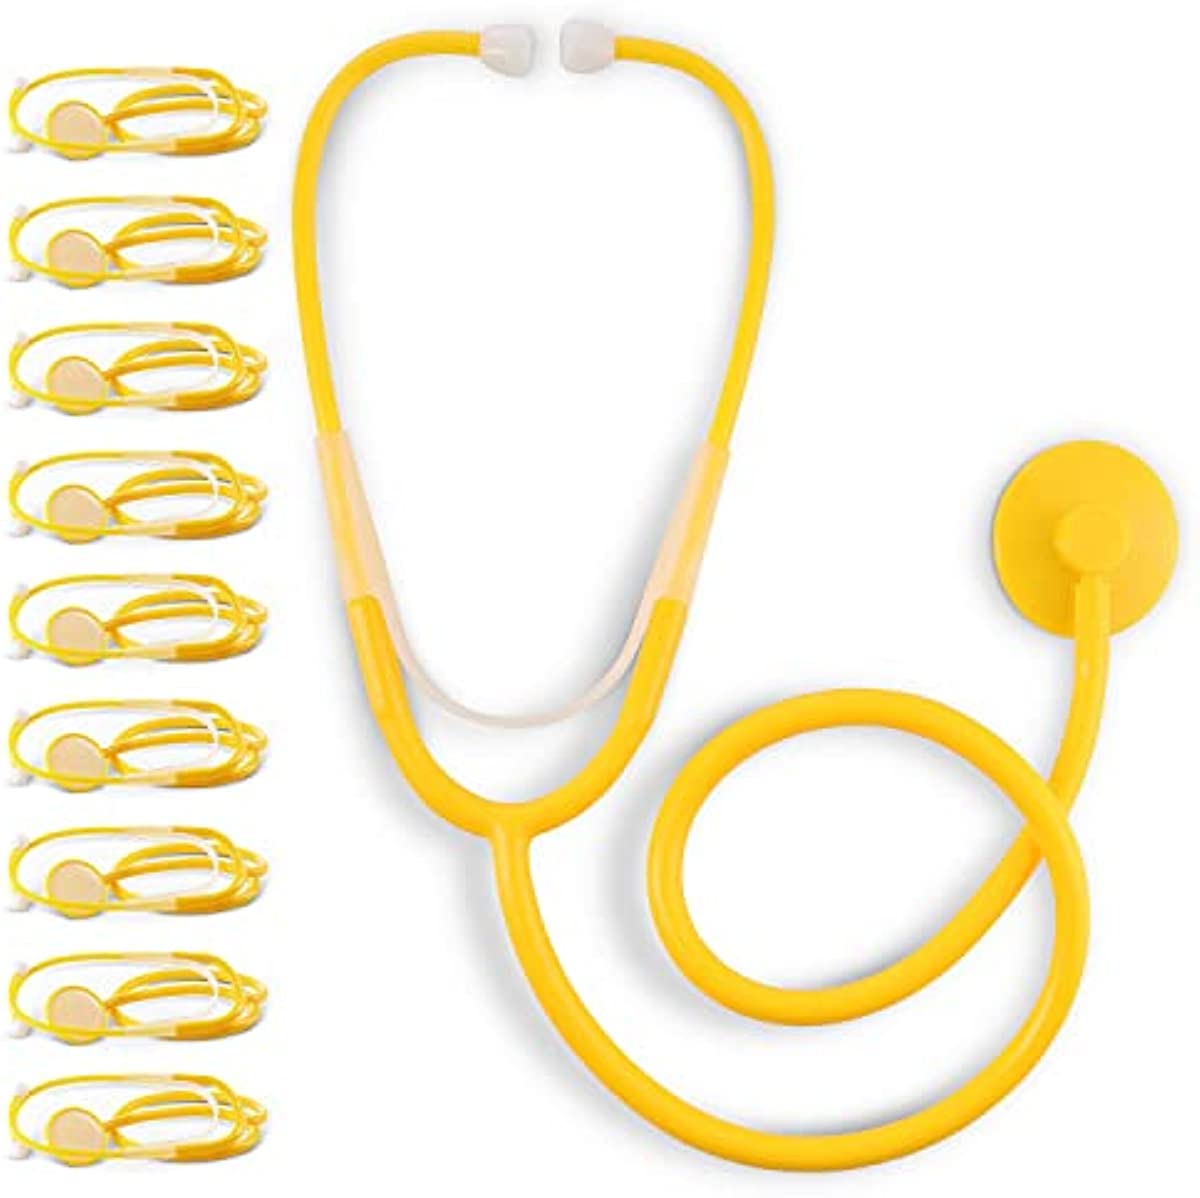 Primacare DS-9294 Pack of 10 Yellow Disposable Stethoscopes with Sound Sensitive Chestpiece and 22” PVC Tubing | Single Patient Use Ultra Lightweight Stethoscope for Home, Education, Doctors, Nurses